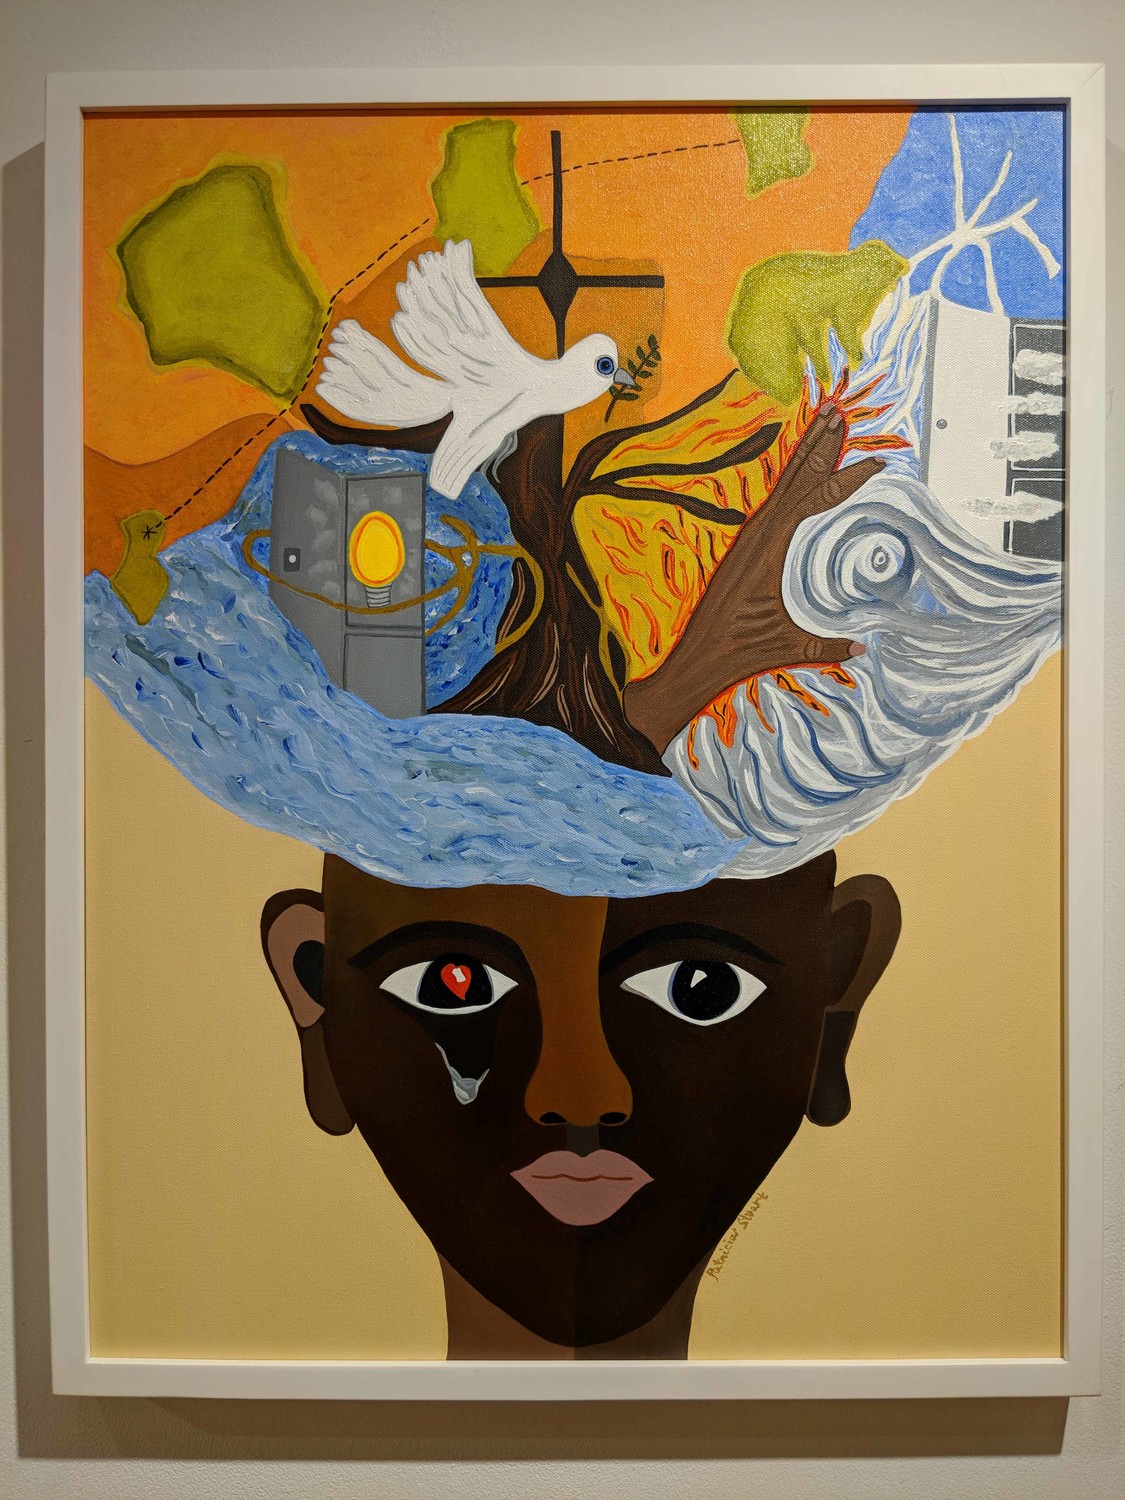 Artist Patricia Stuart lets family and religion inspire her work. Her piece ‘Creative Mind’ is one of many works exhibited at the Yonkers Public Library’s Riverfront Art Gallery through Feb. 21.